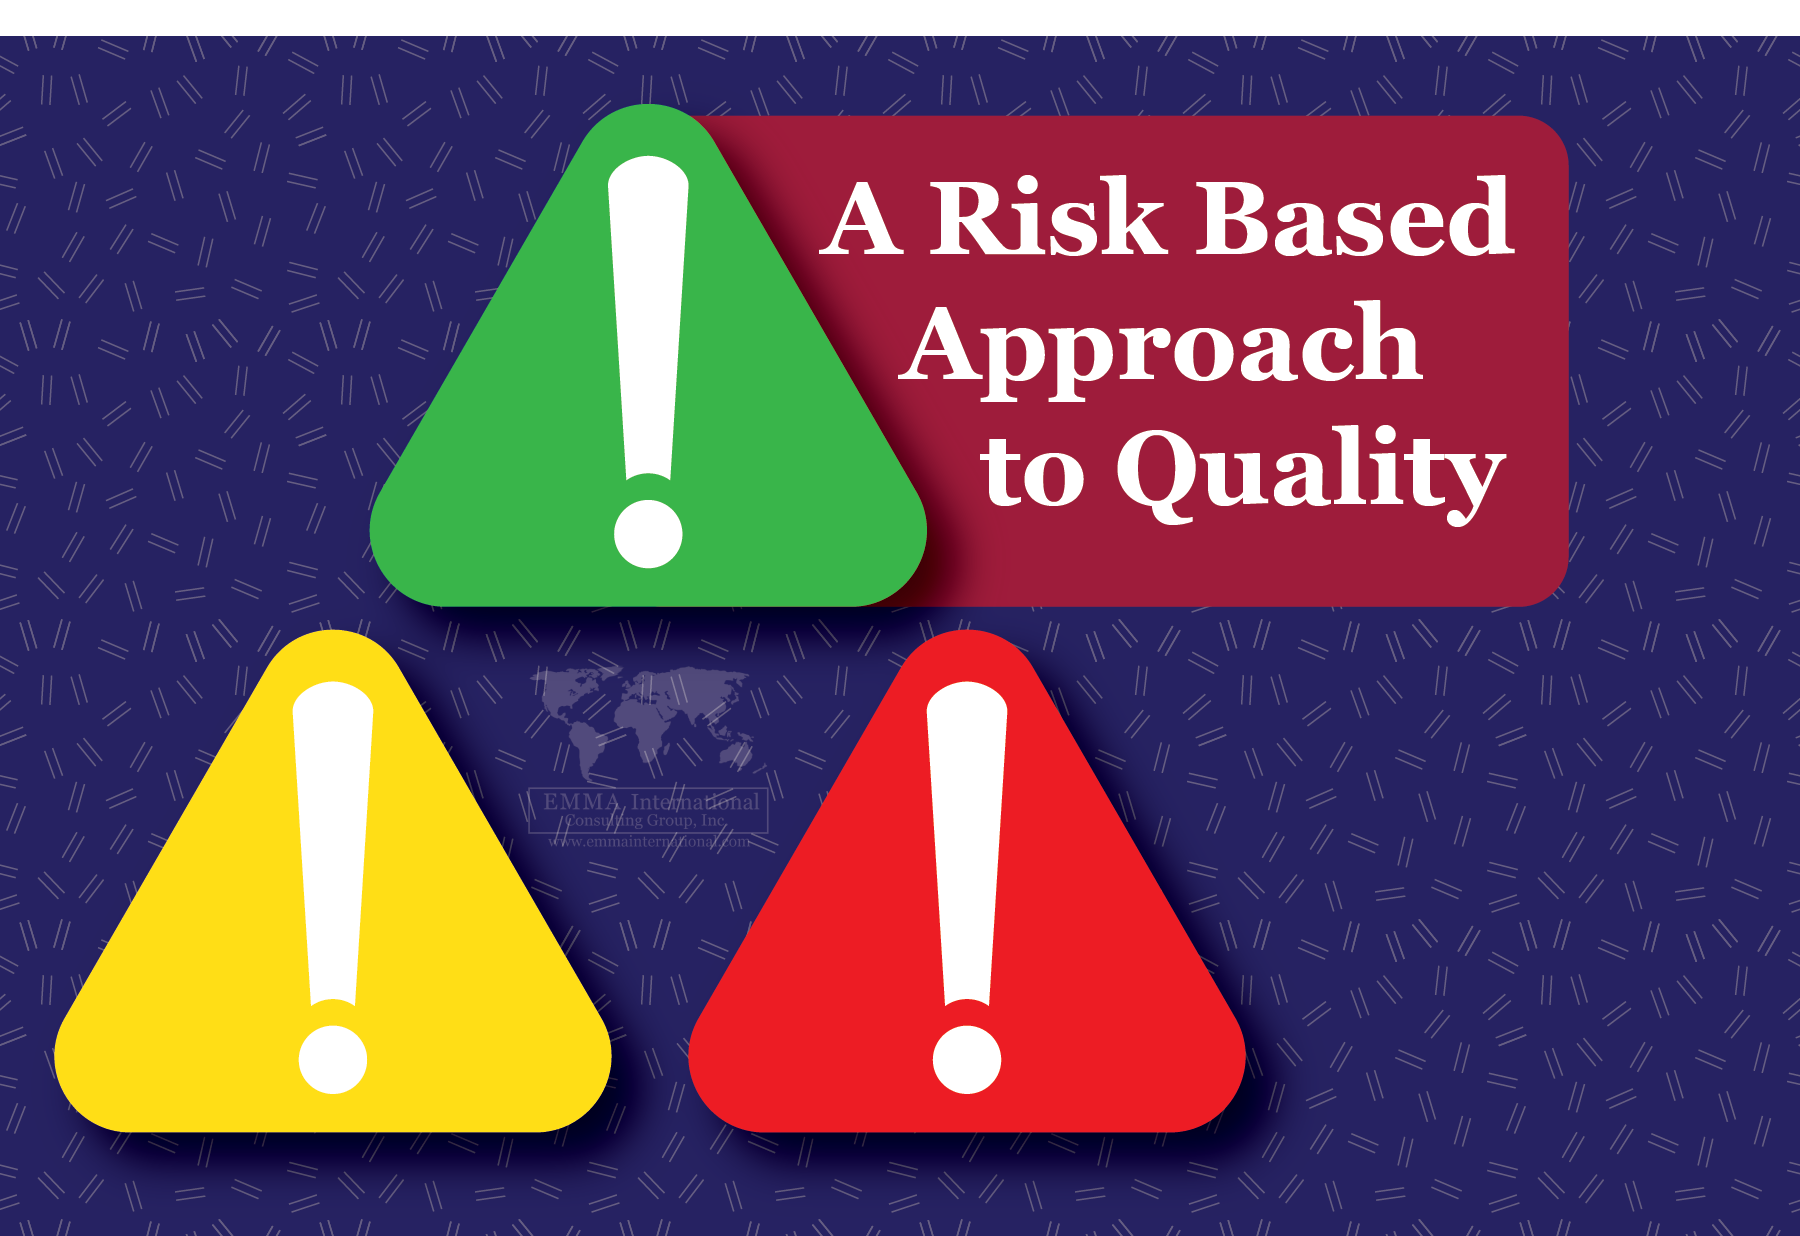 A Risk Based Approach to Quality